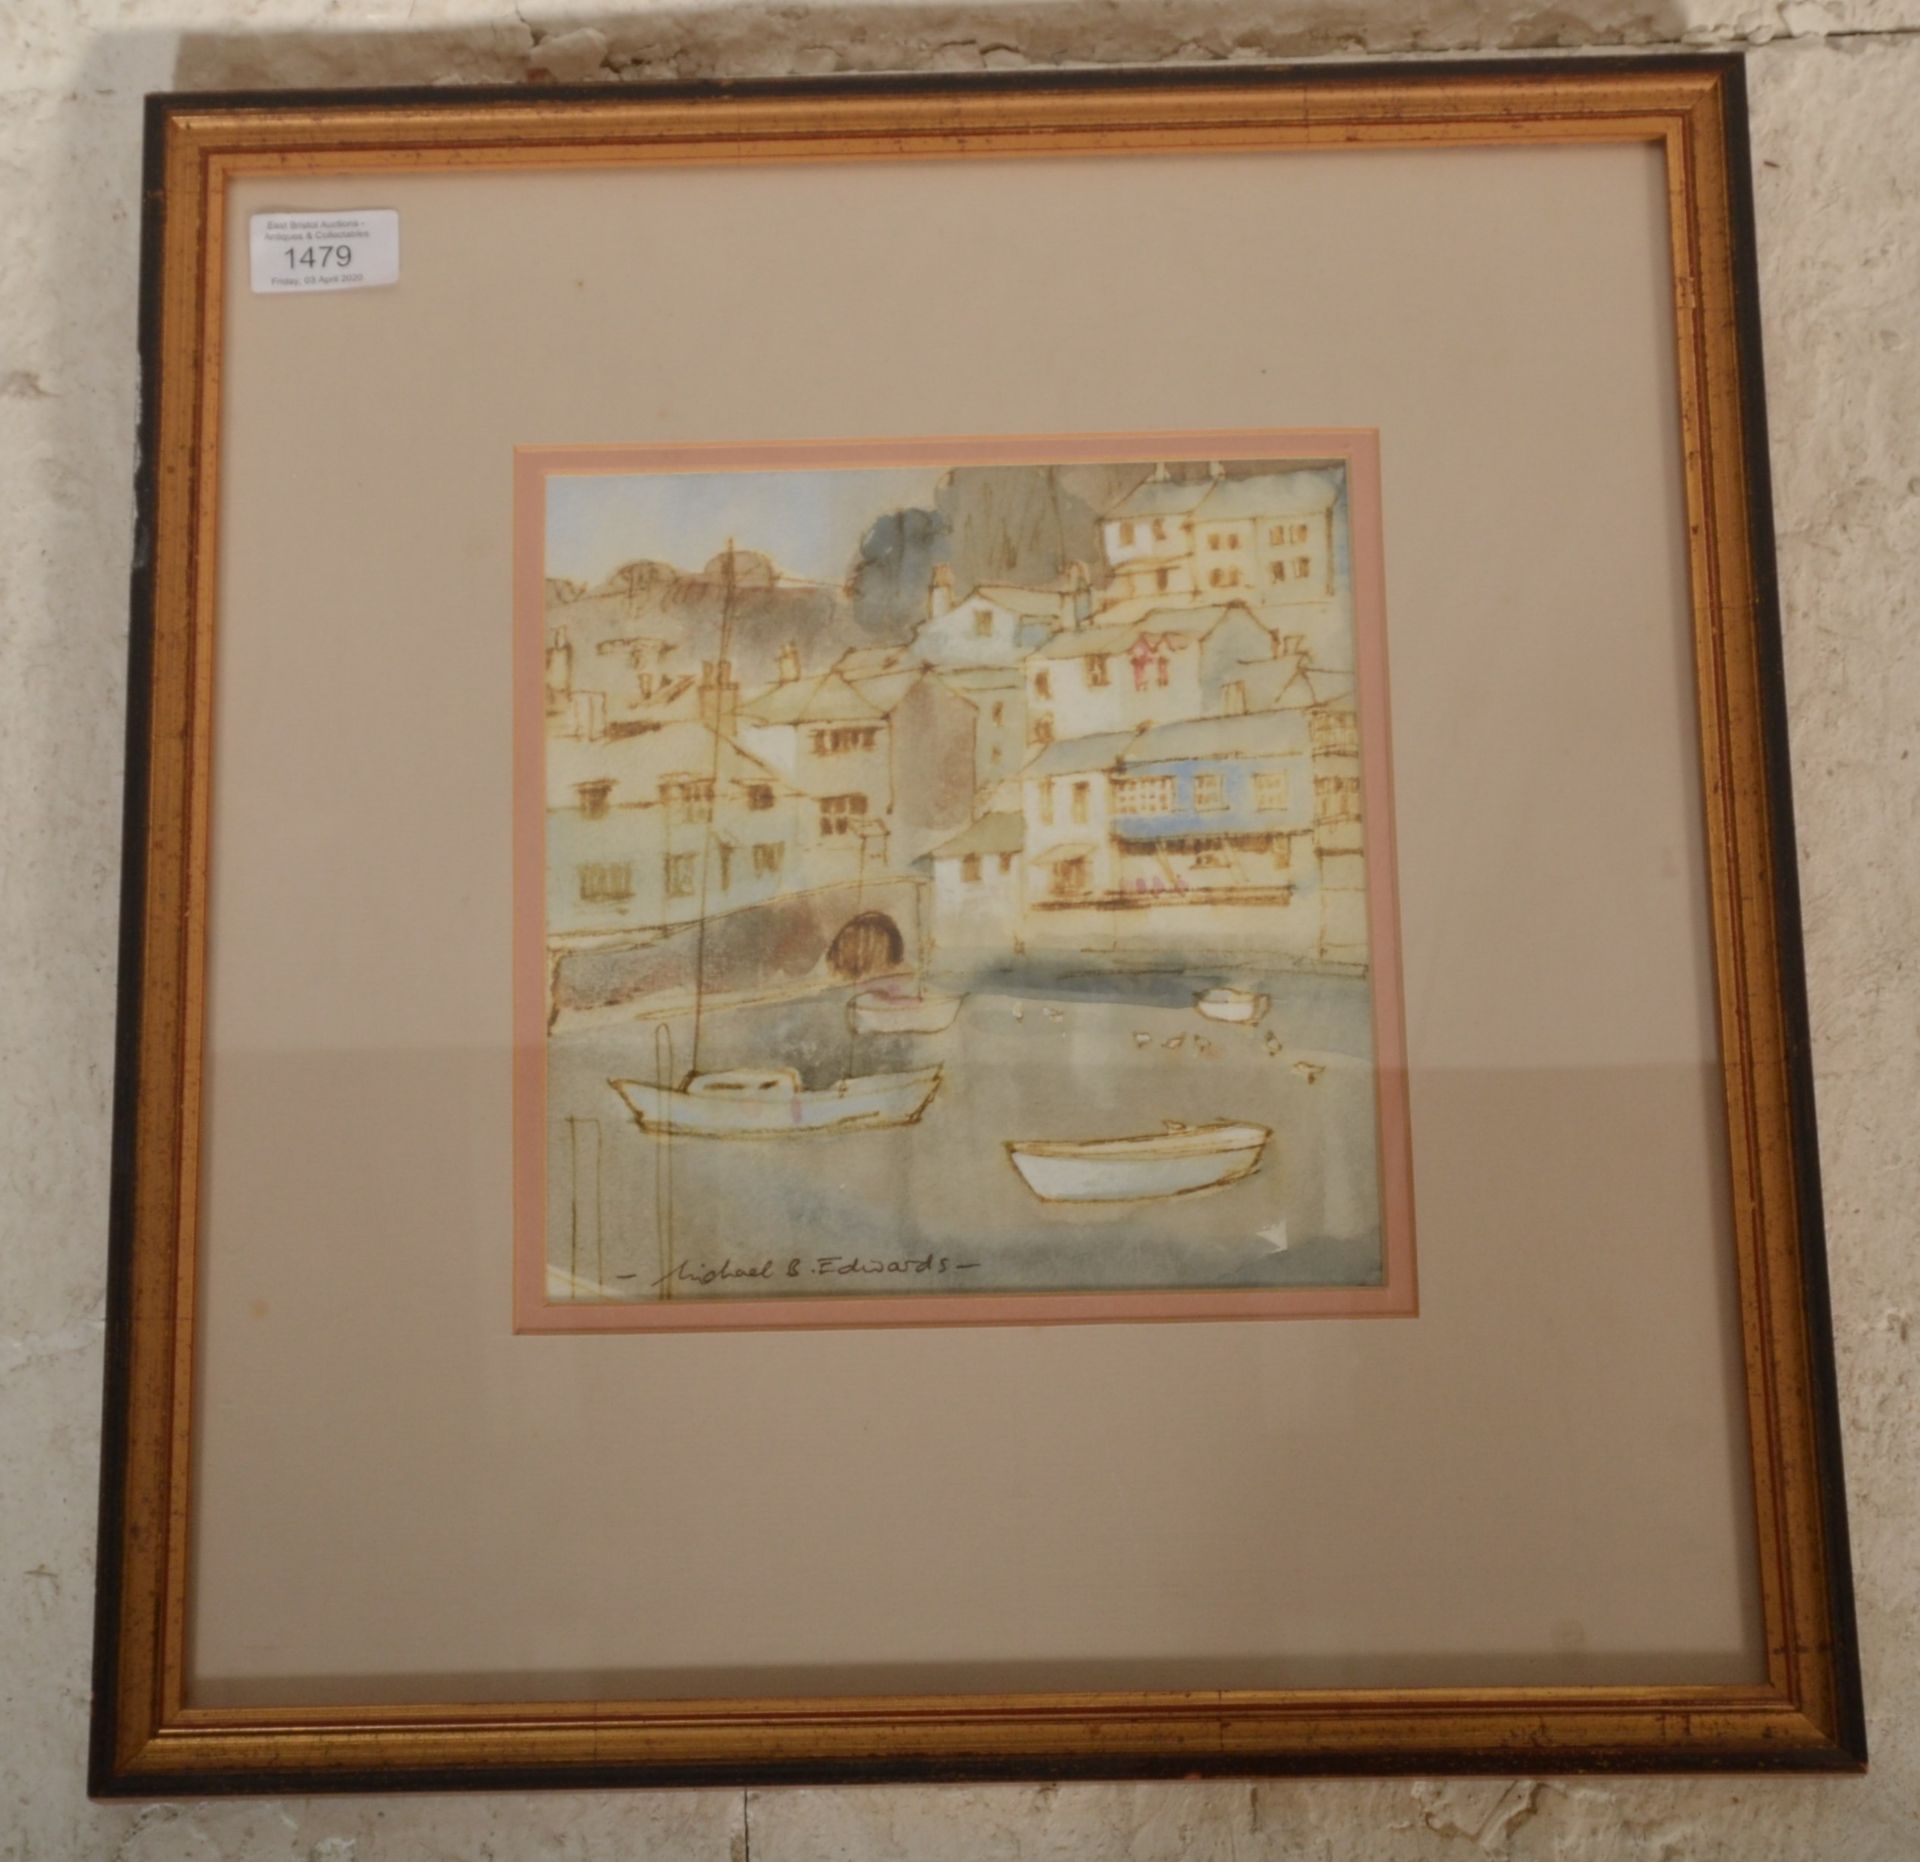 Michael B Edwards - A original water colour painting depicting a harbour side with moored boats